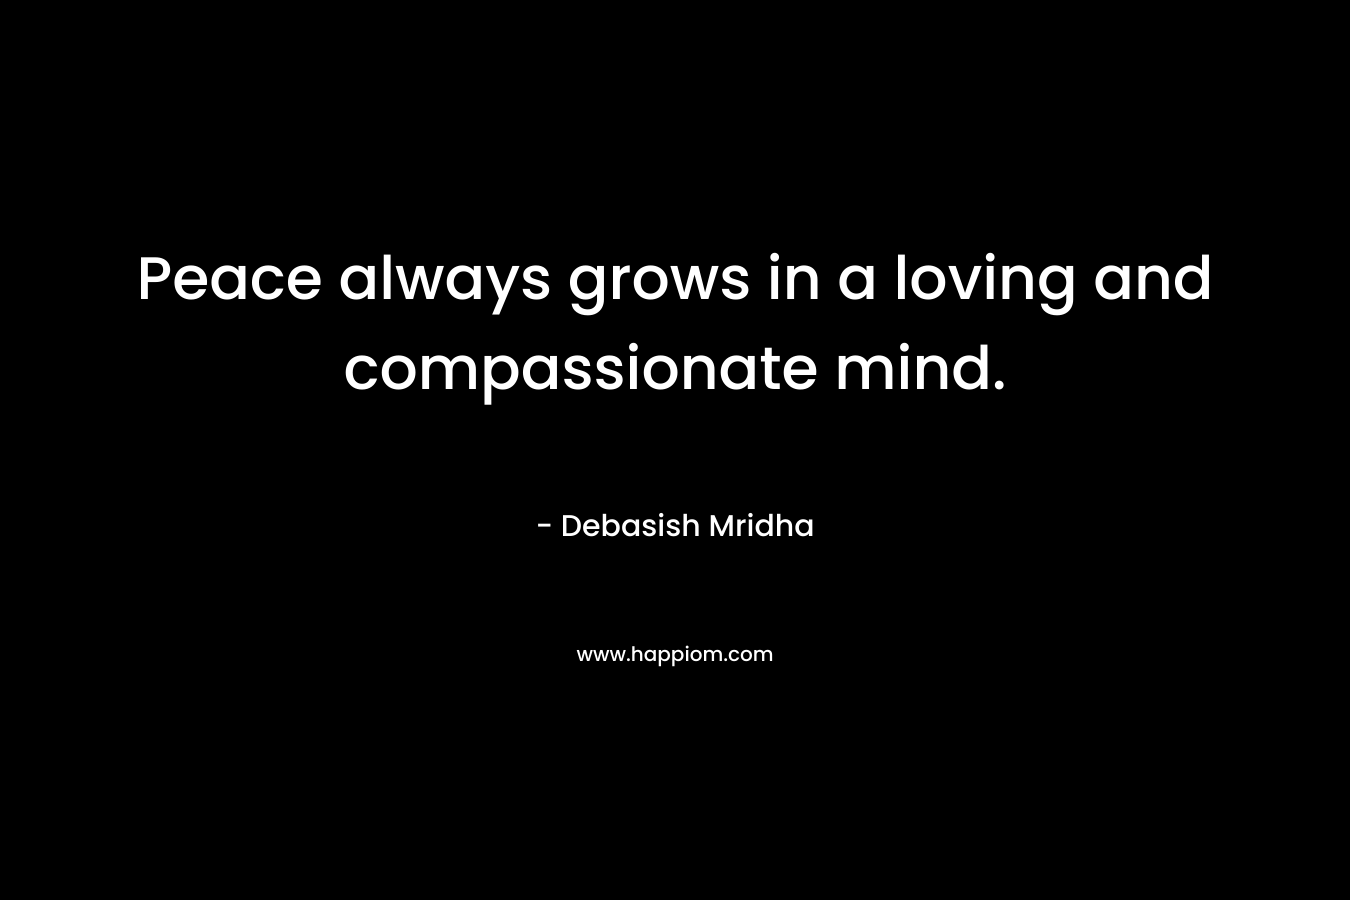 Peace always grows in a loving and compassionate mind.